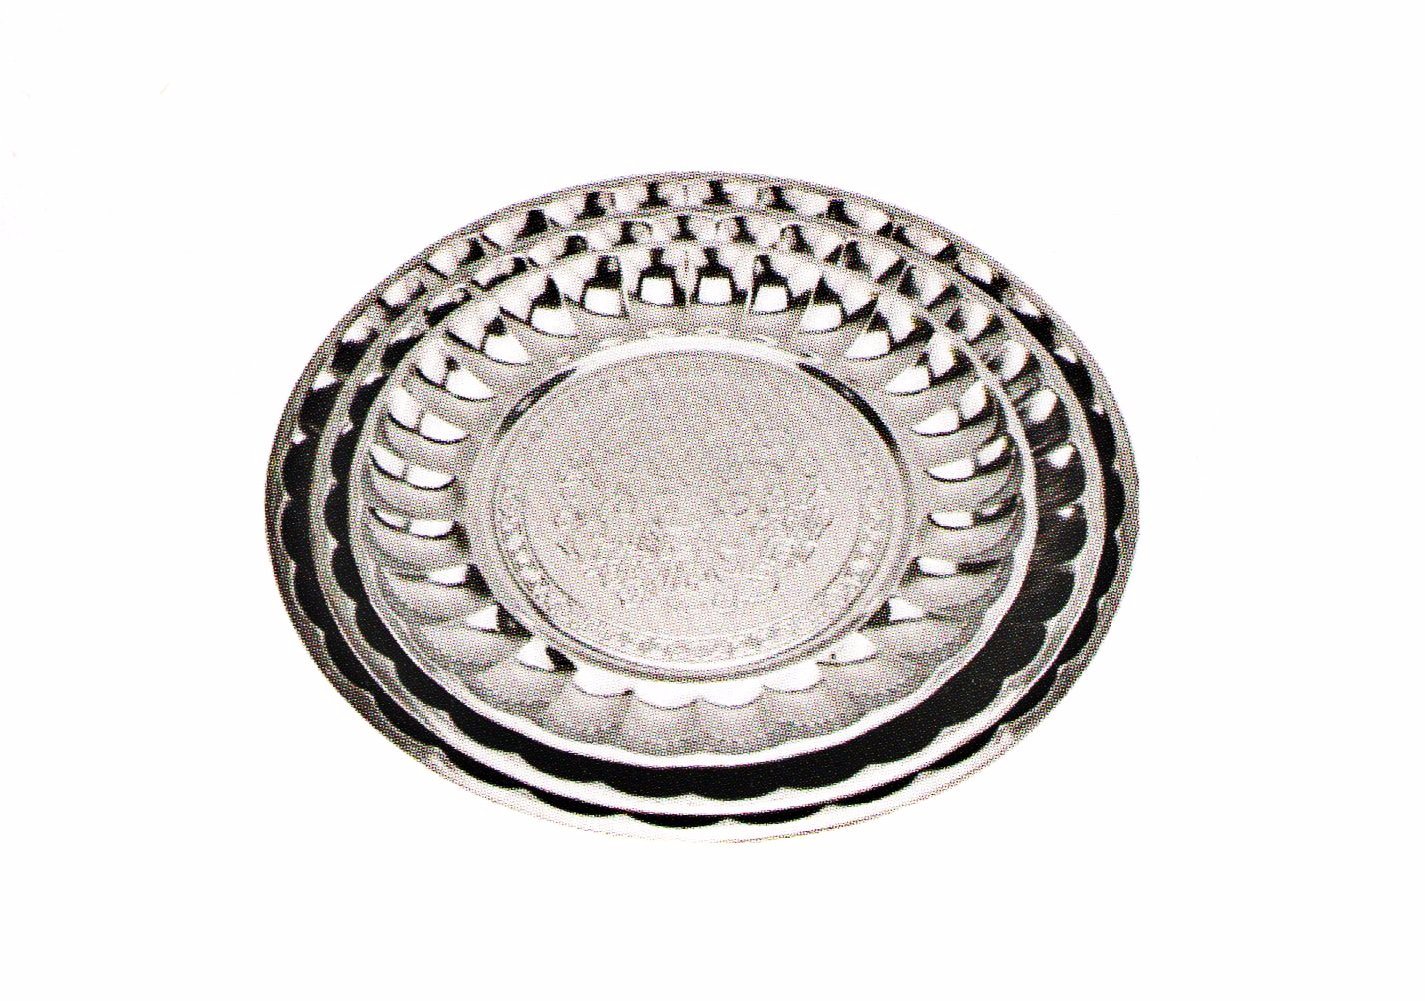 Big Discount Auto Juicer -
 Stainless Steel Kitchenware Decorative Pattern Round Tray / Dinner Plate Sp025 – Long Prosper